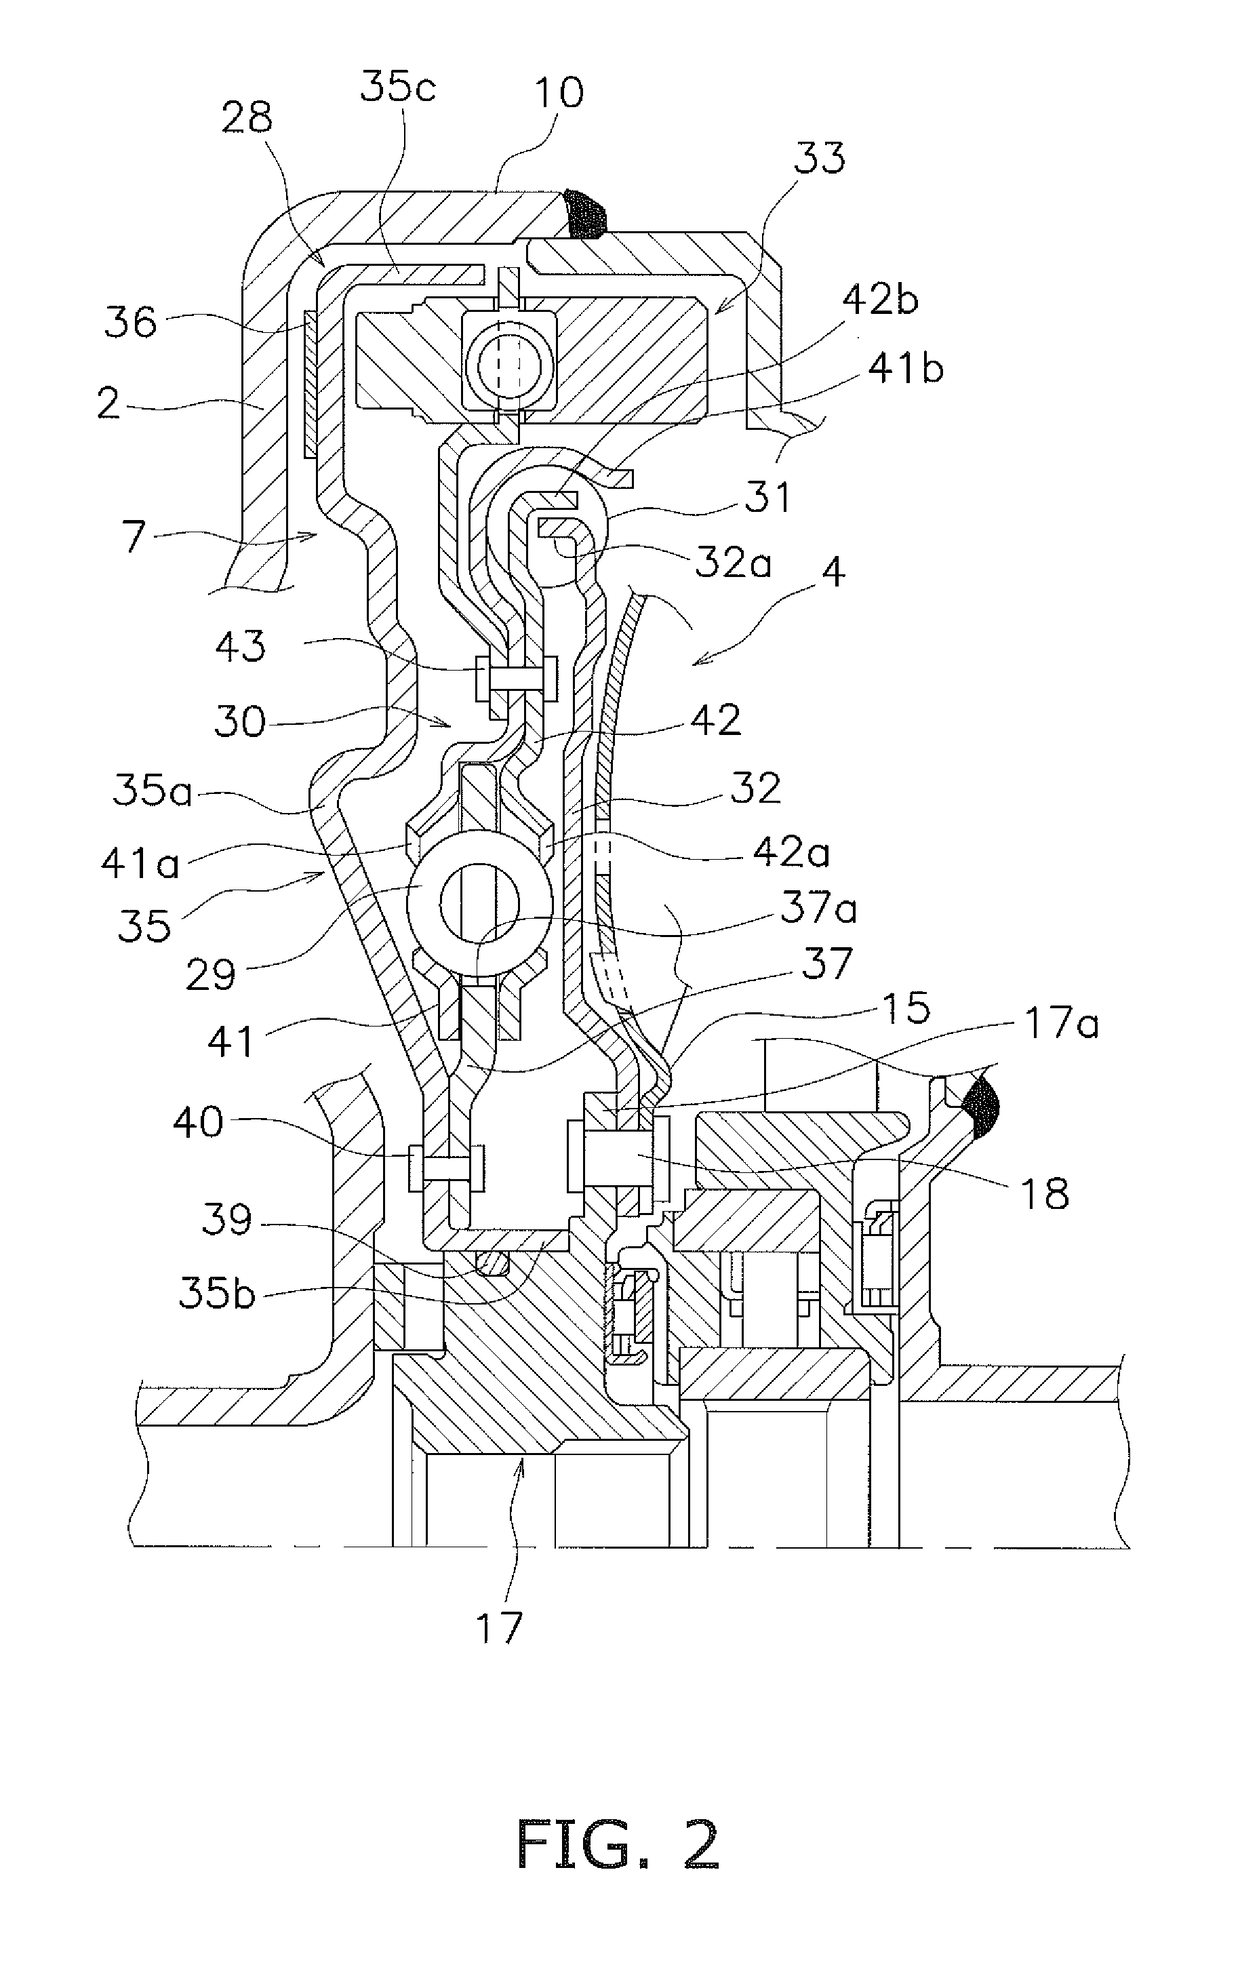 Lock-up device for torque converter